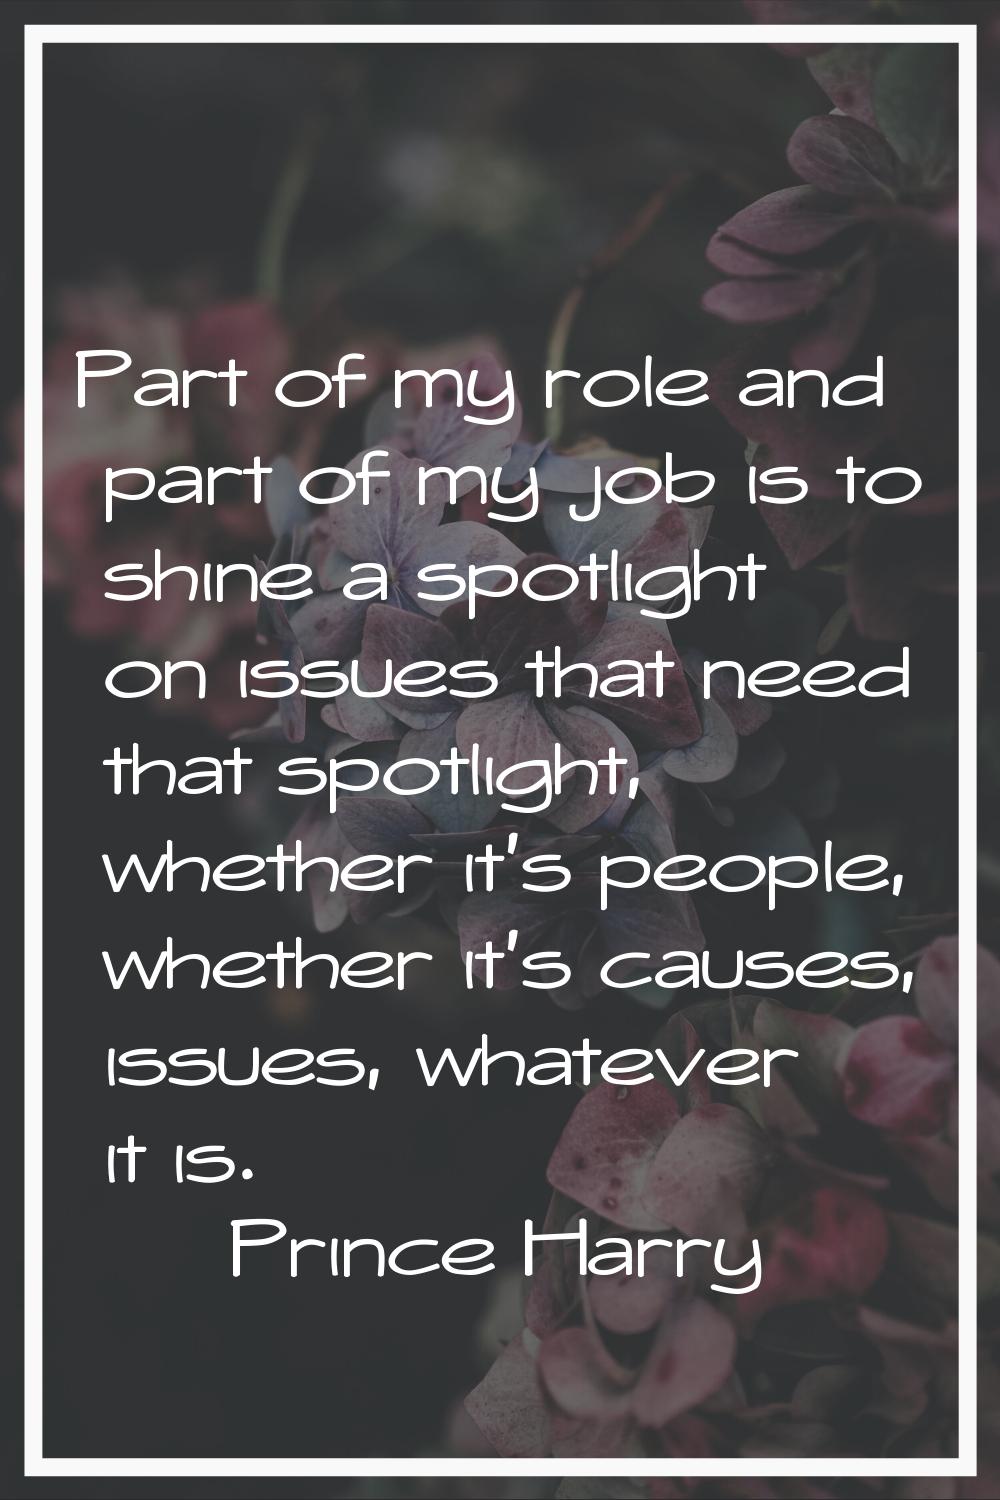 Part of my role and part of my job is to shine a spotlight on issues that need that spotlight, whet